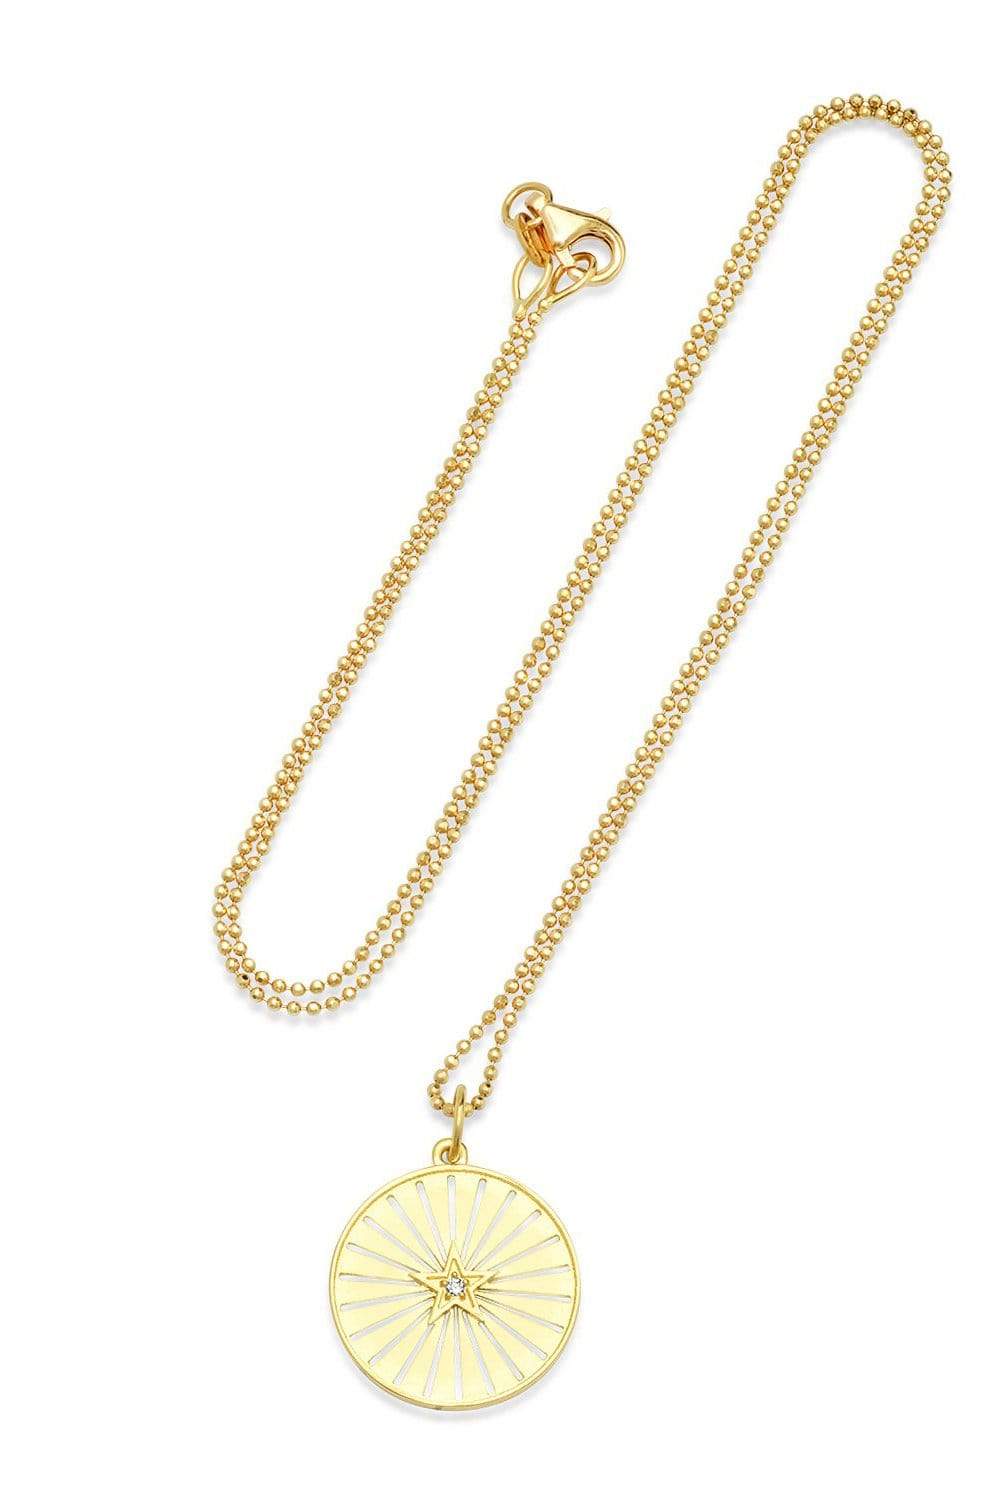 ANDREA FOHRMAN-Textured Gold Star Pendant Necklace-YELLOW GOLD